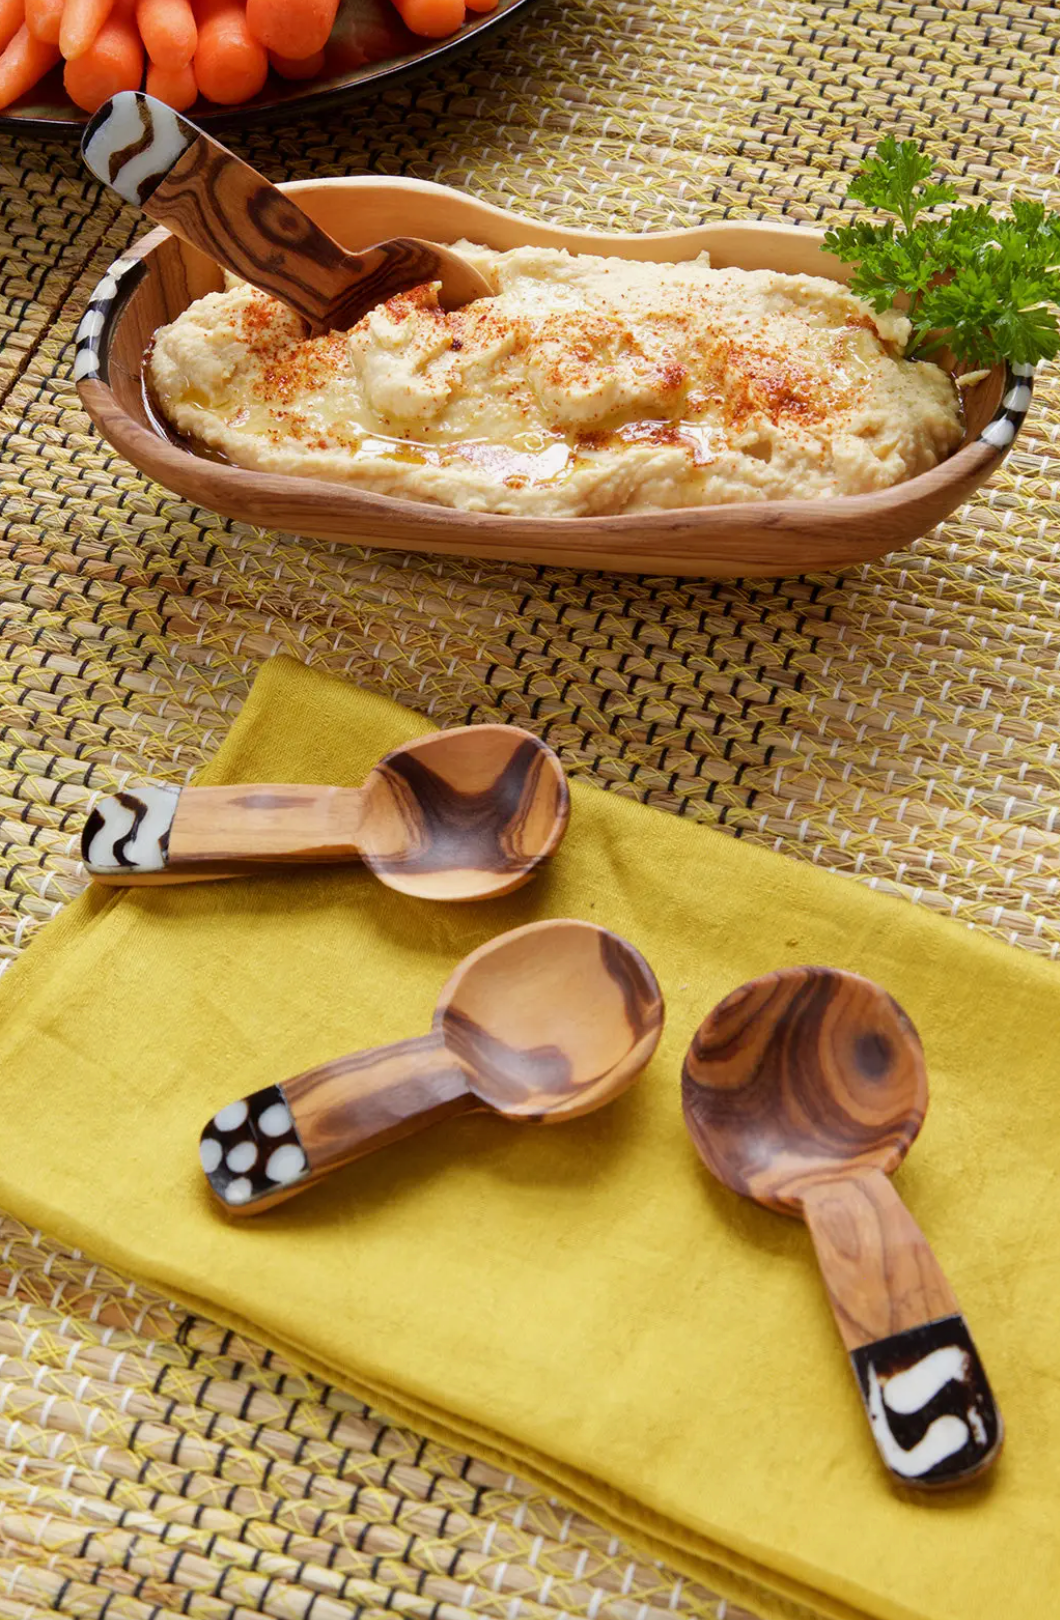 Olive Wood Spice Scoops with Bone